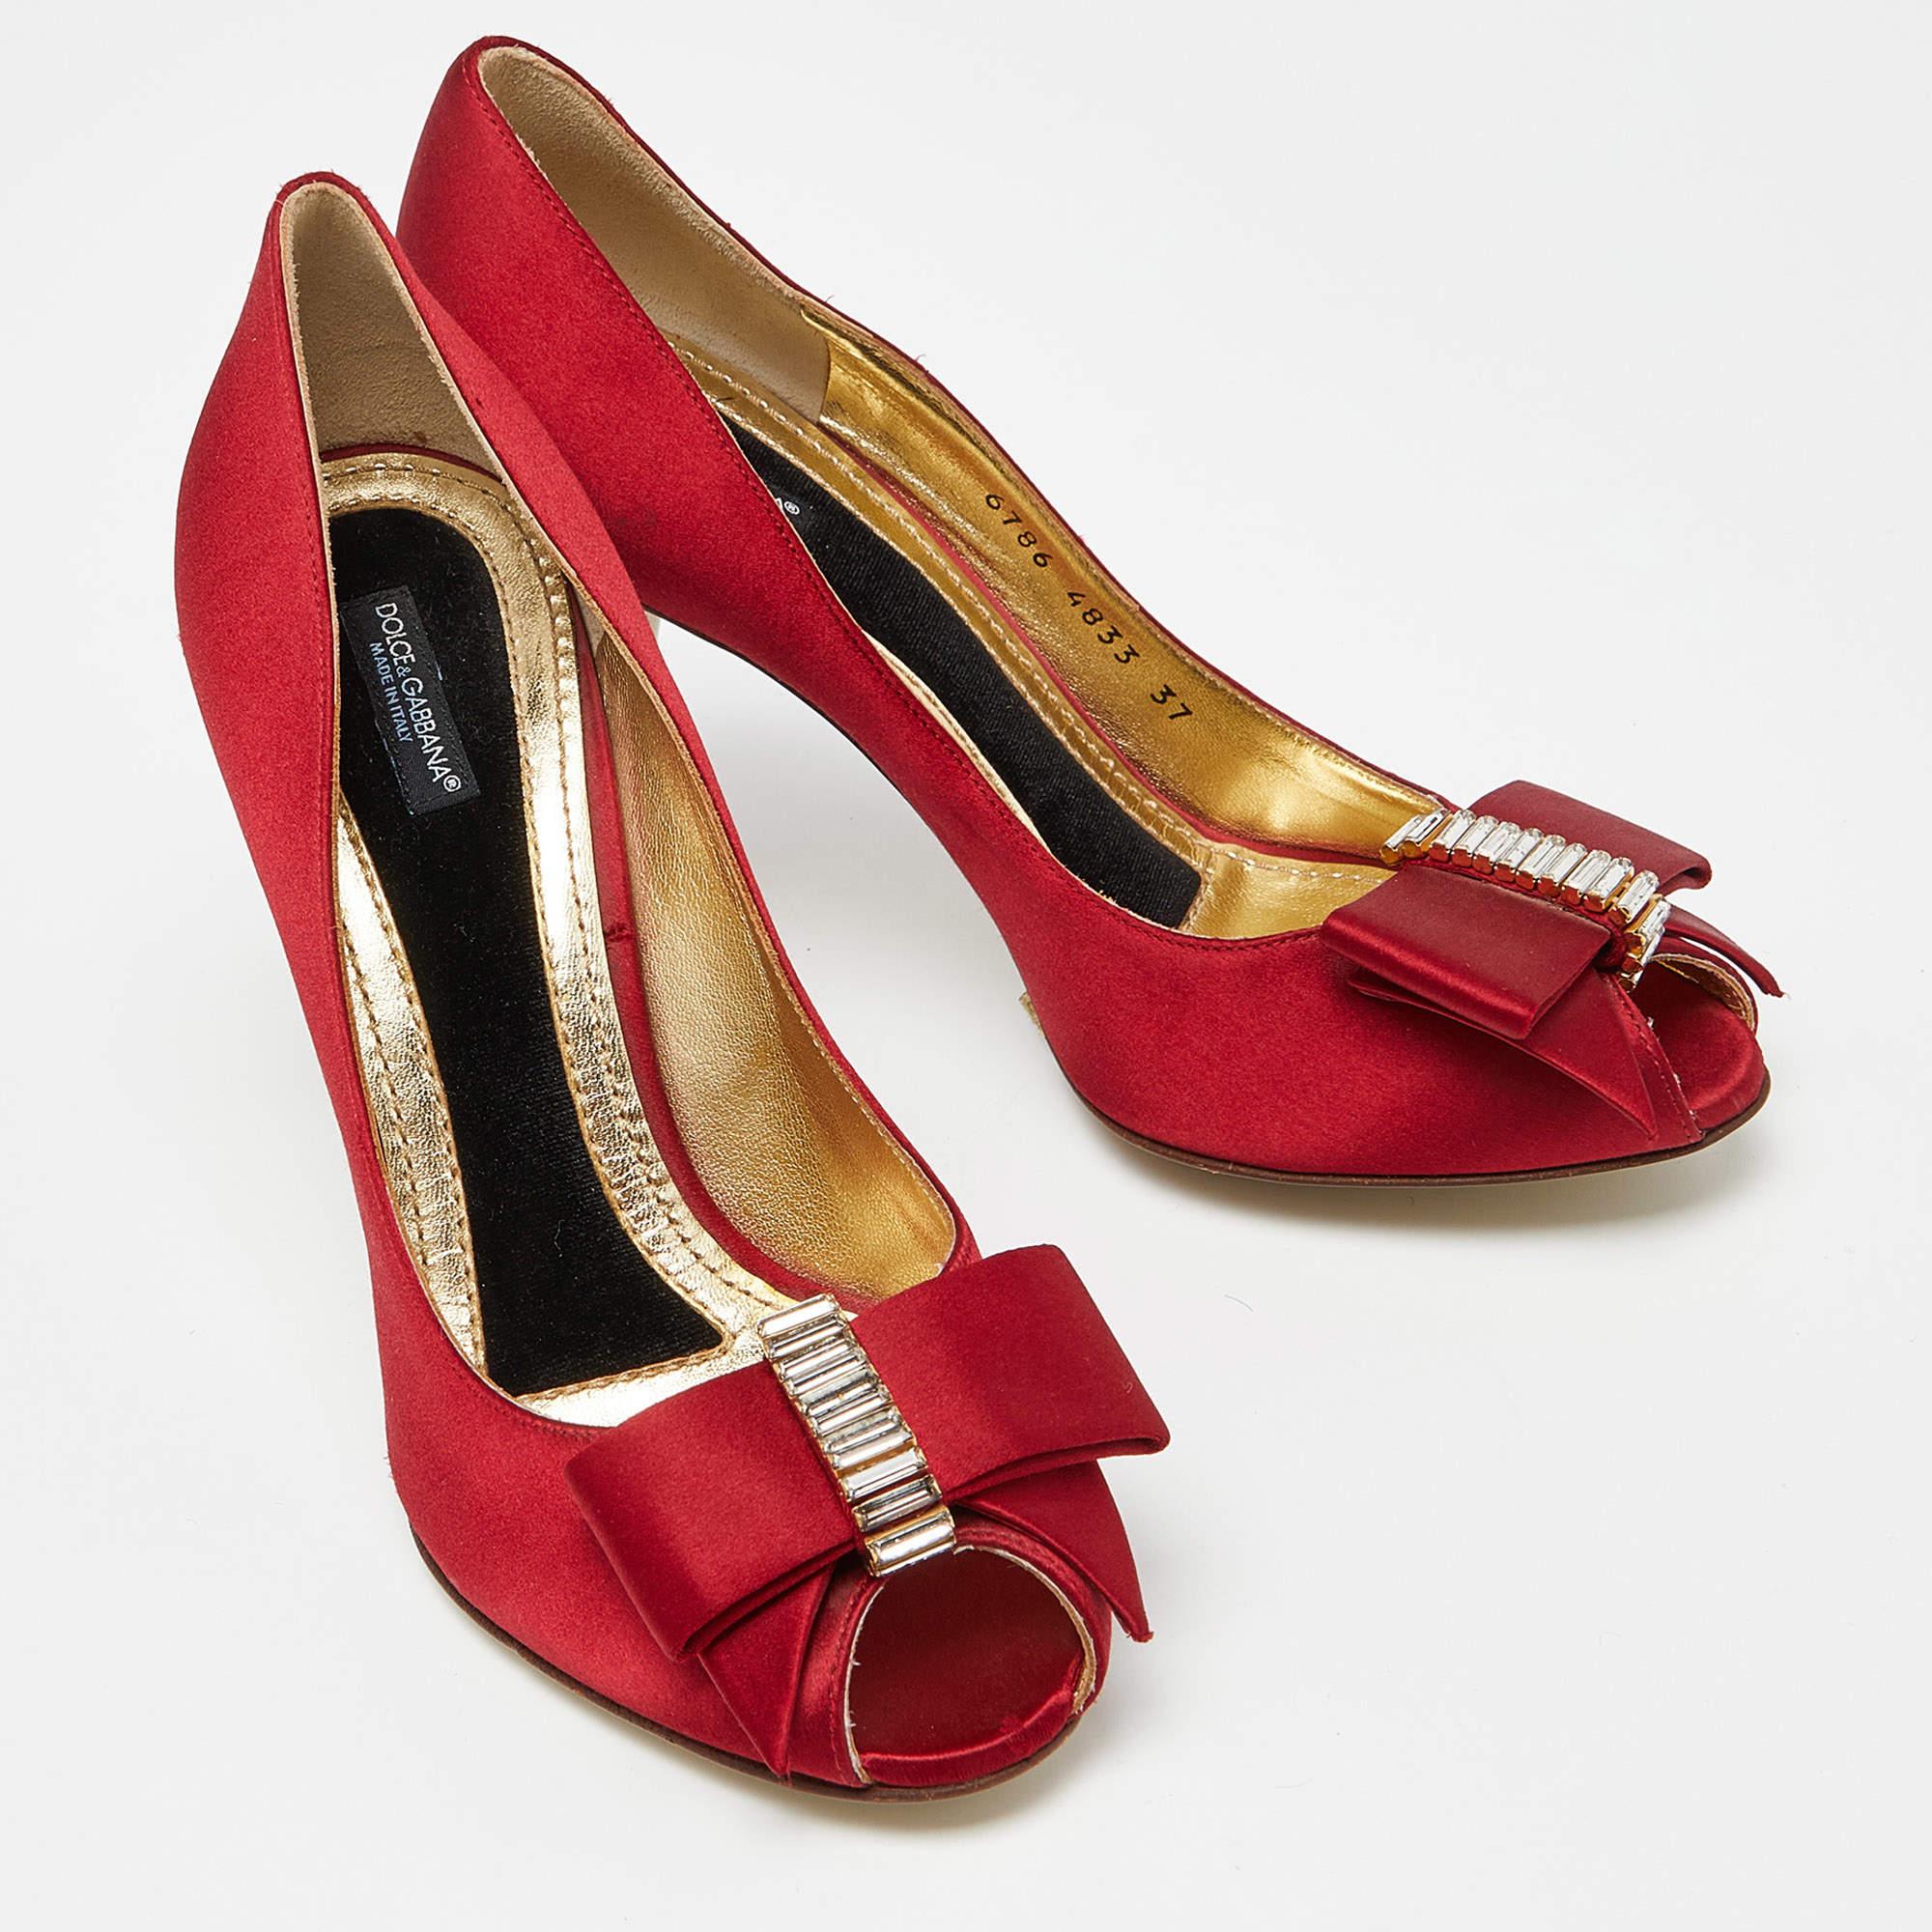 Dolce & Gabbana Red Satin Crystal Embellished Bow Peep Toe Pumps Size 37 In New Condition For Sale In Dubai, Al Qouz 2